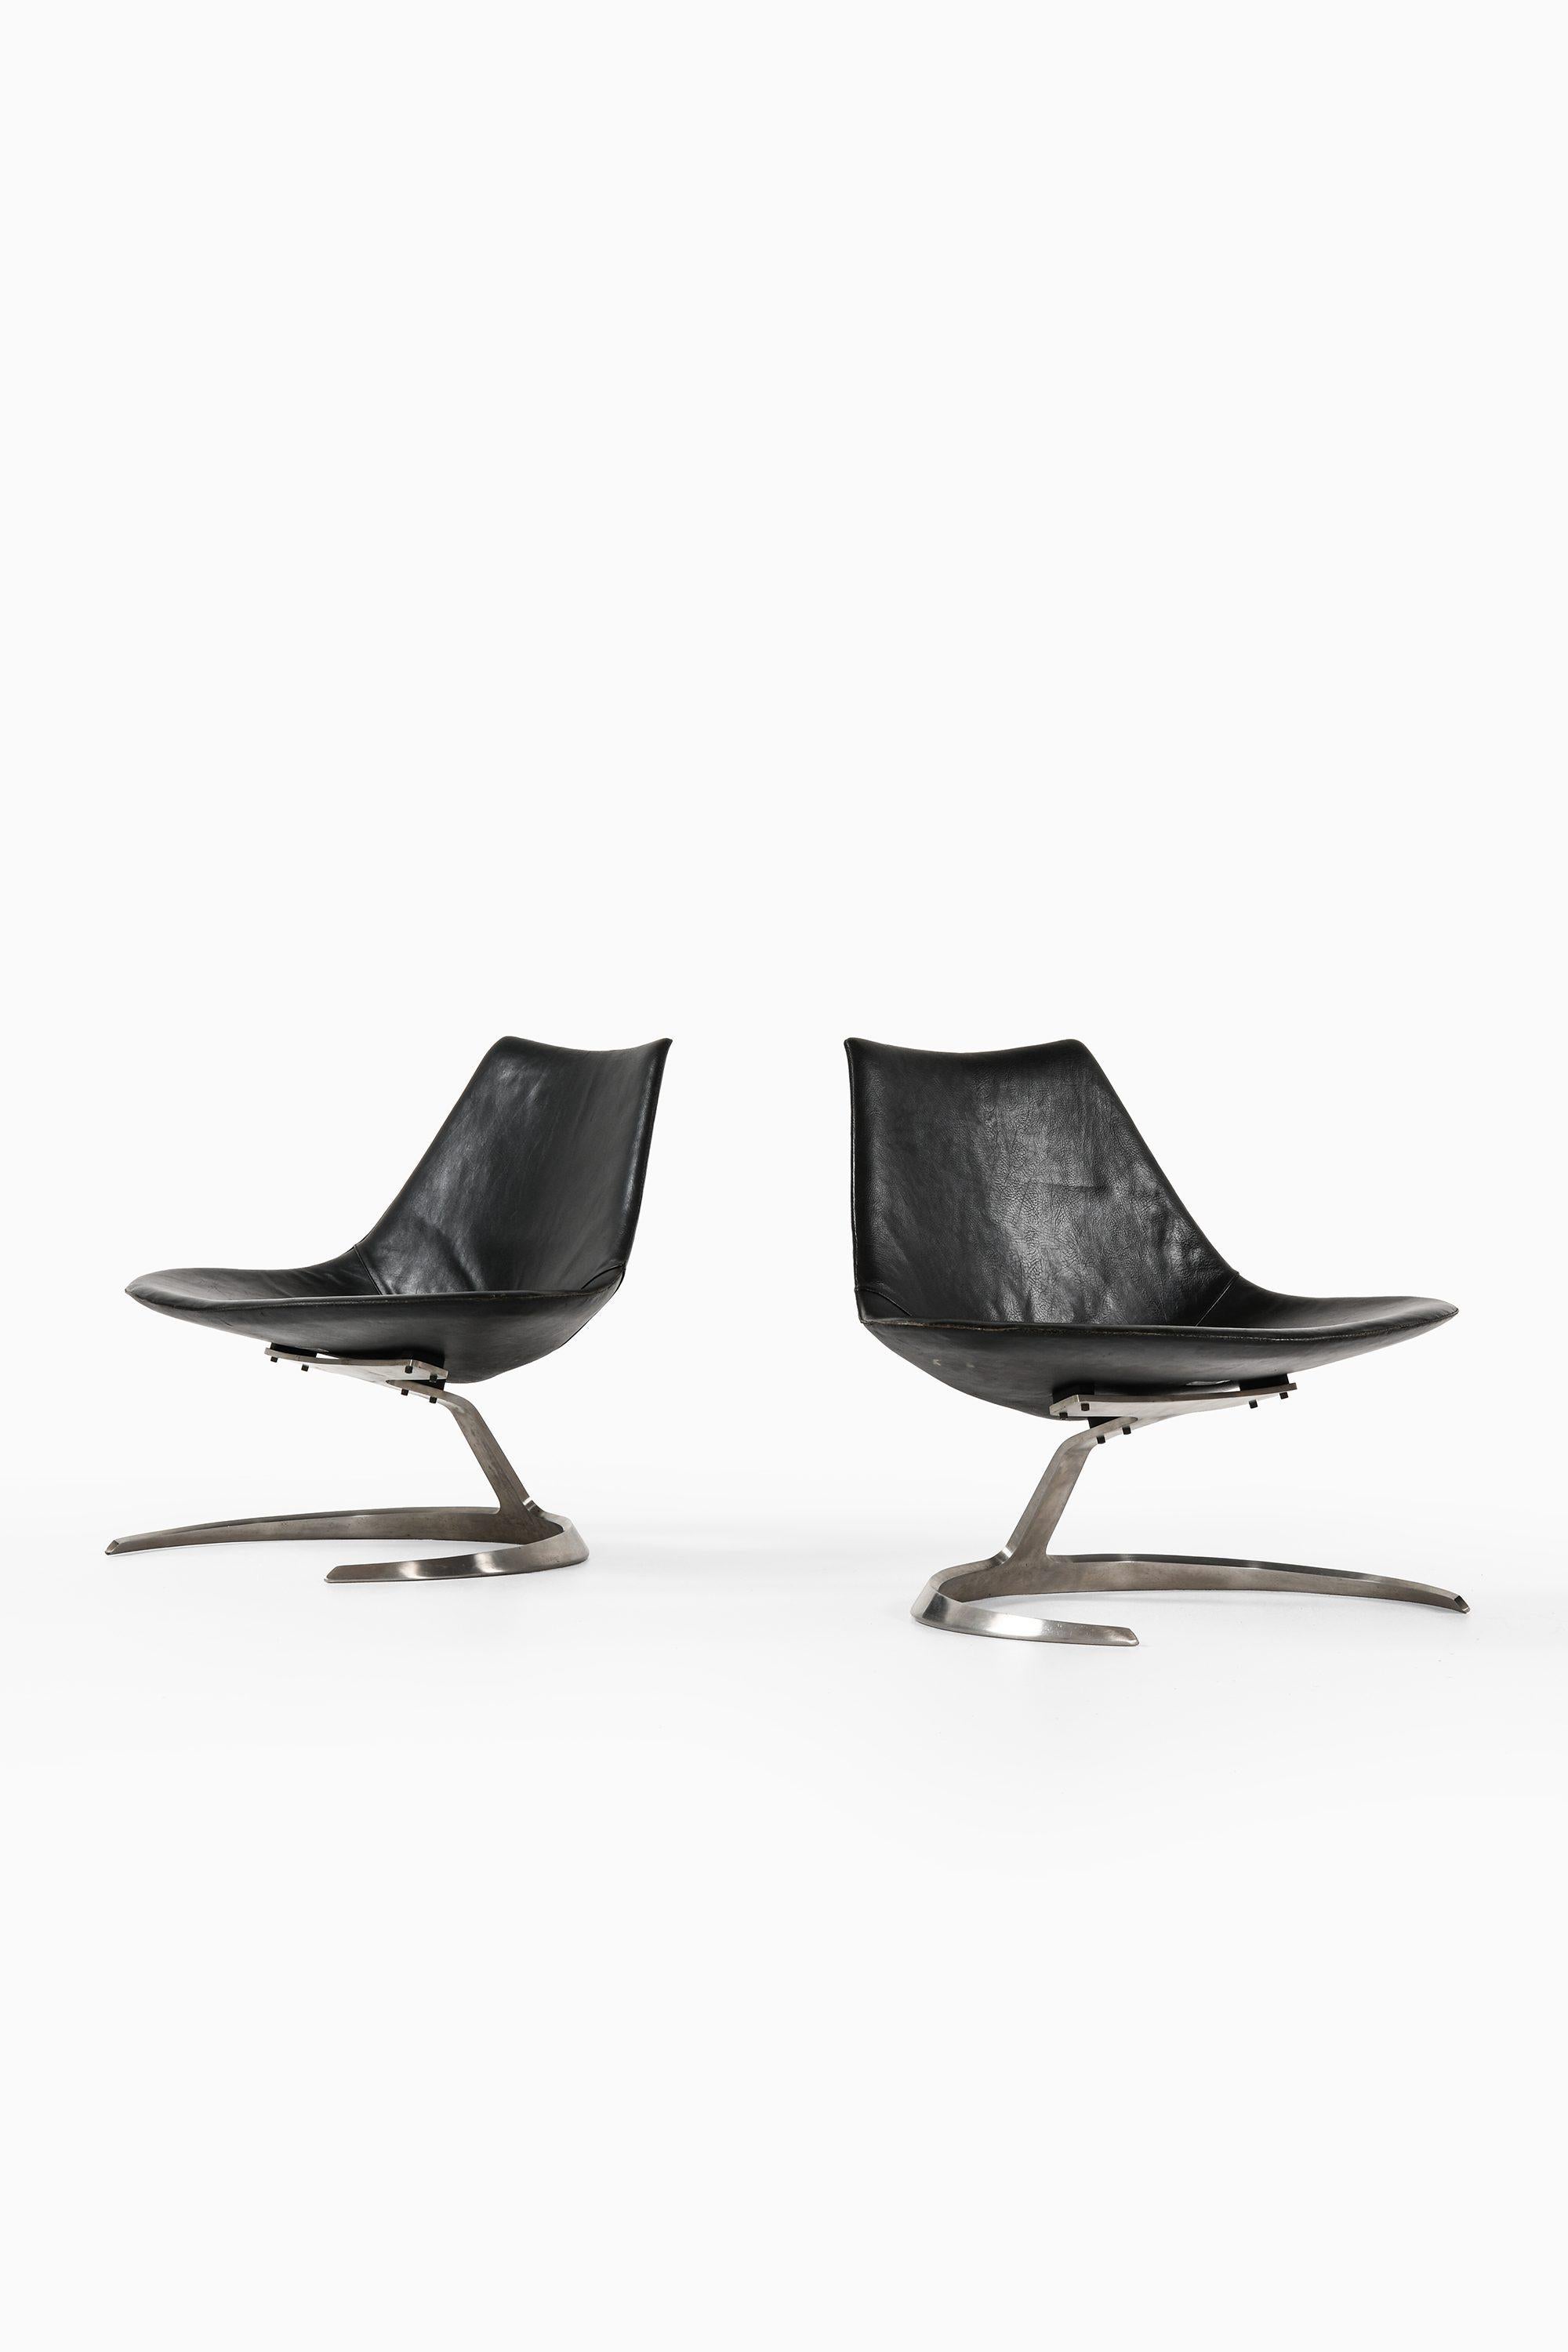 Preben Fabricius & Jørgen Kastholm Scimitar easy chairs Steel and Leather, 1960s For Sale 2